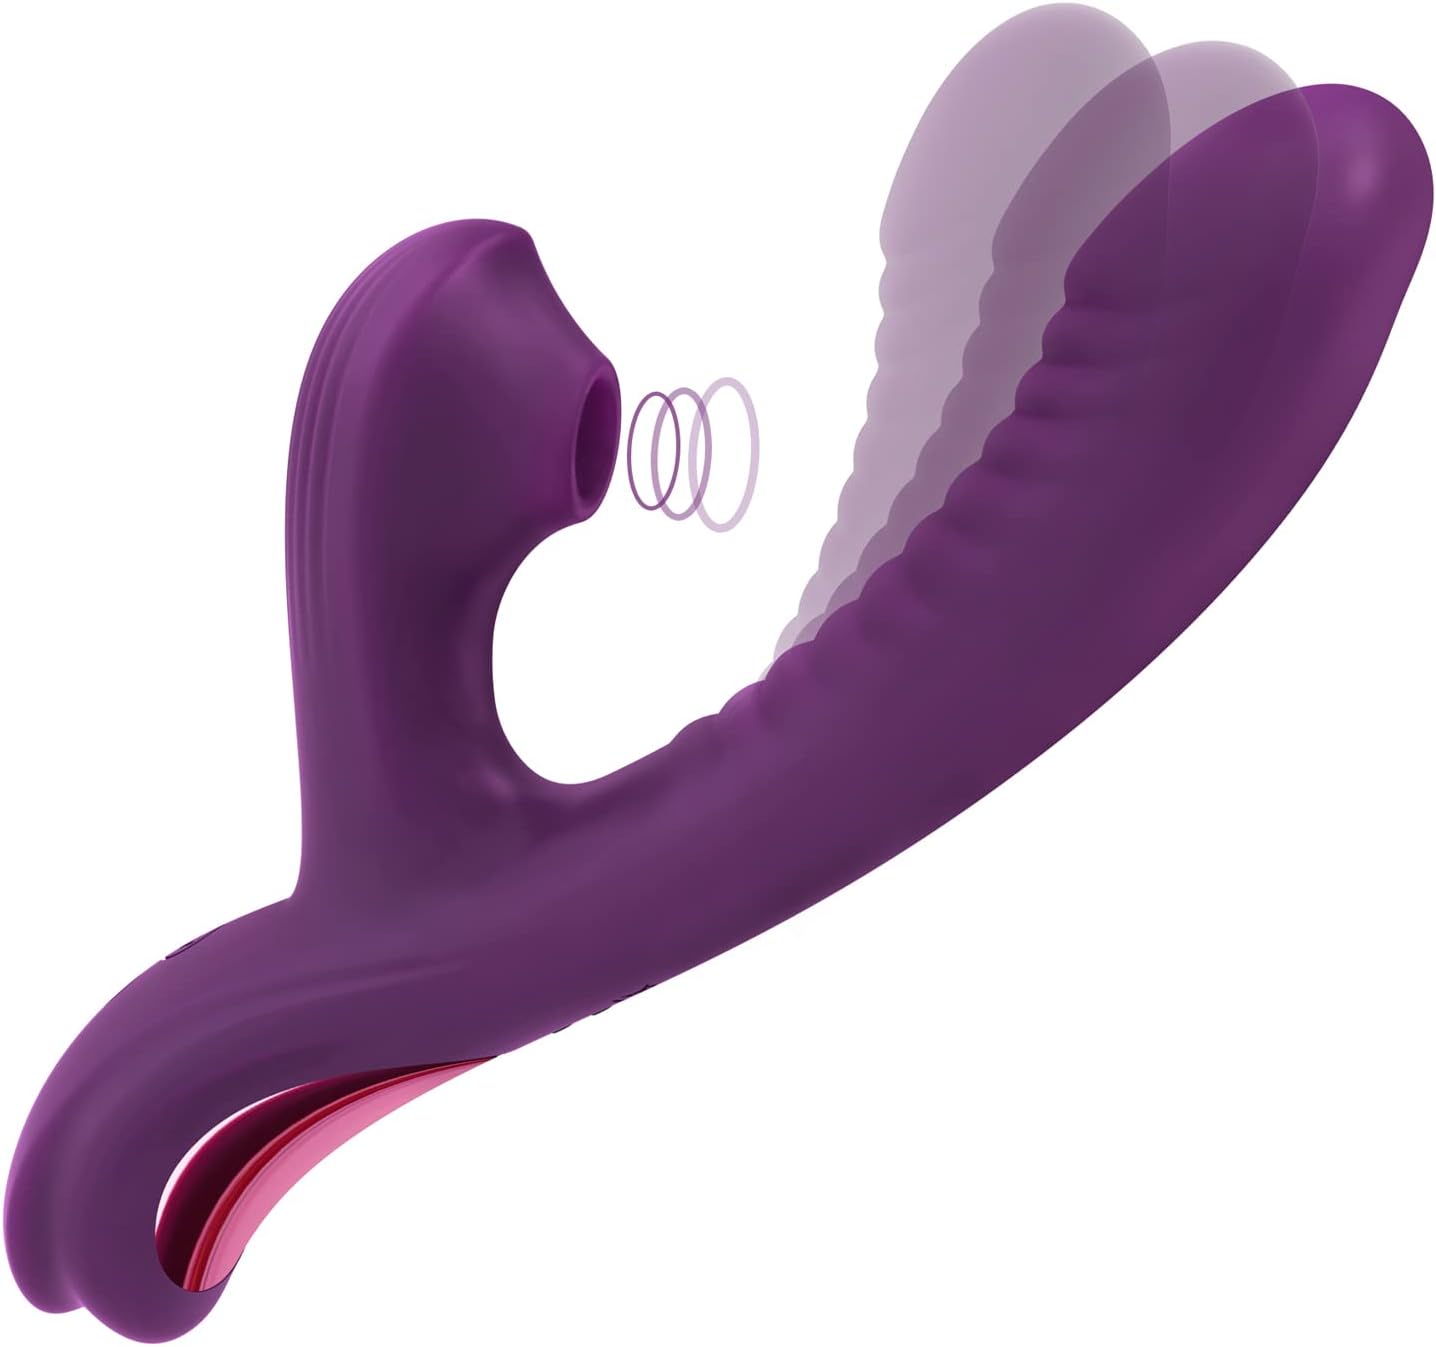 7 Types of Vibrators To Help You Find Your Pleasure in 2023 image image image